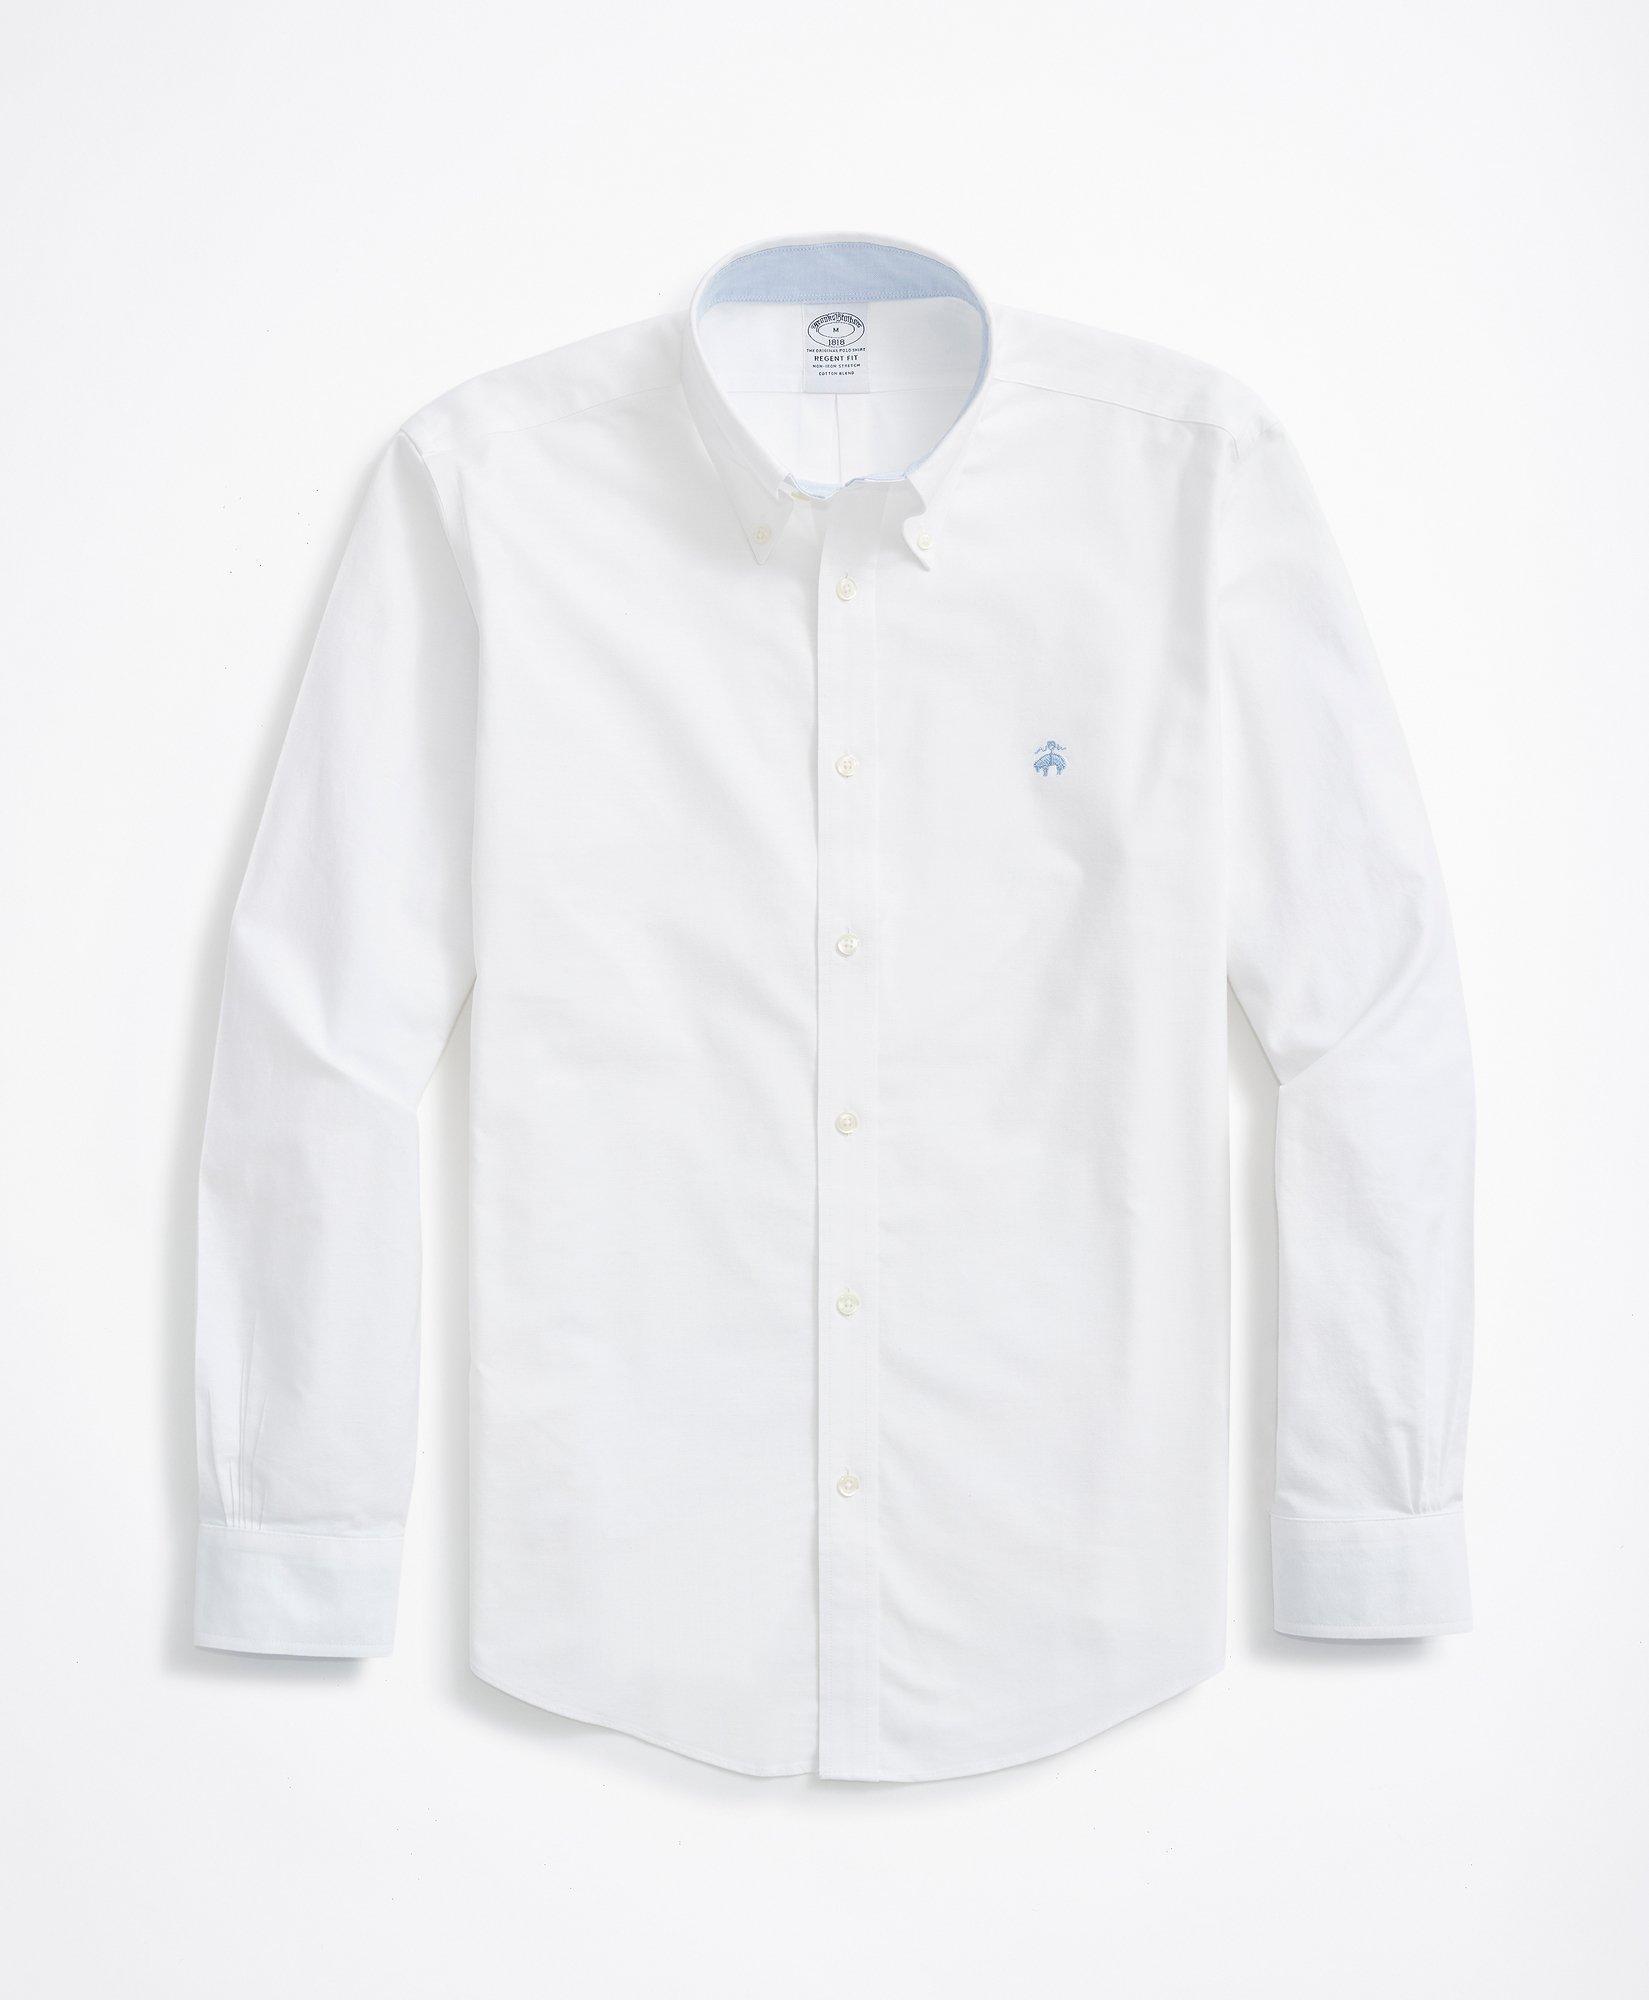 Brooks Brothers Stretch Regent Regular-fit Sport Shirt, Non-iron Oxford | White | Size Large